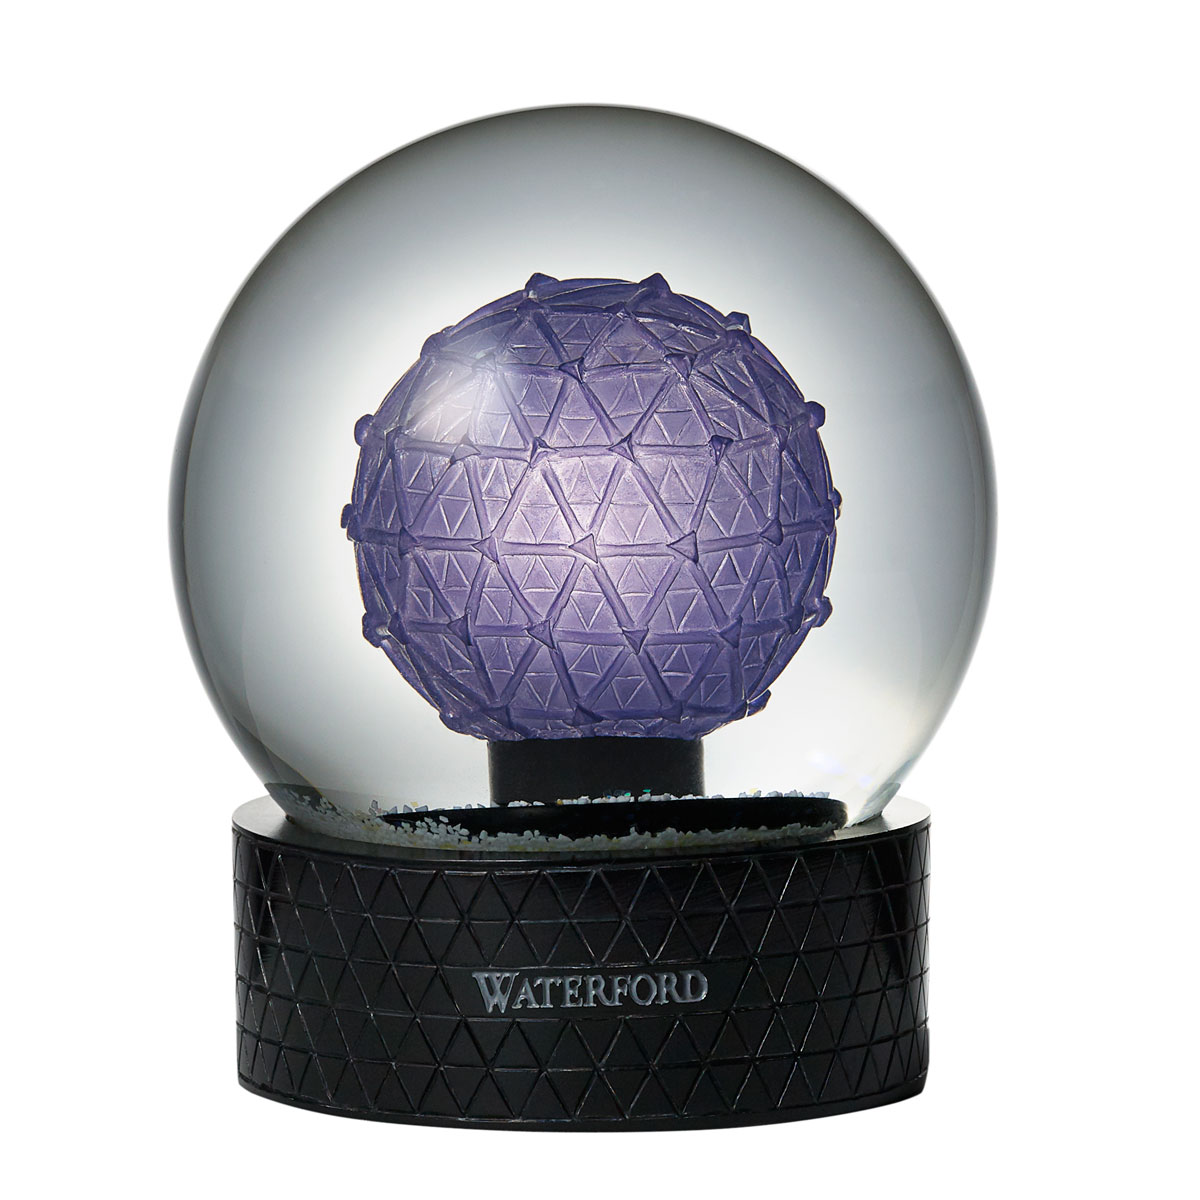 Waterford Crystal 2020 Times Square Snowglobe